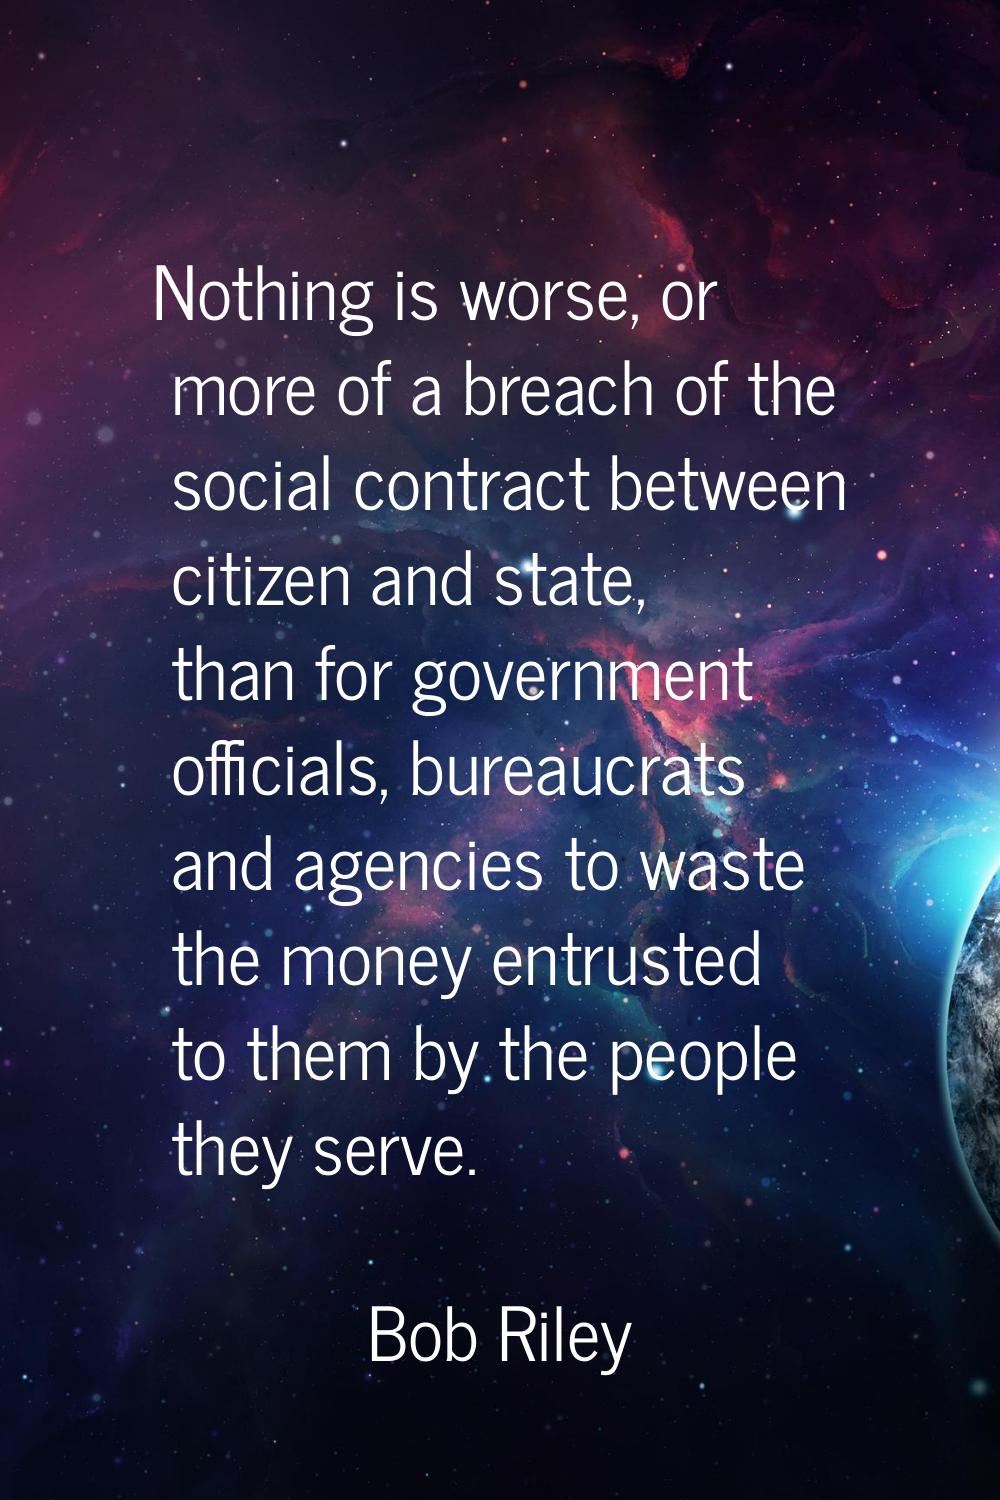 Nothing is worse, or more of a breach of the social contract between citizen and state, than for go